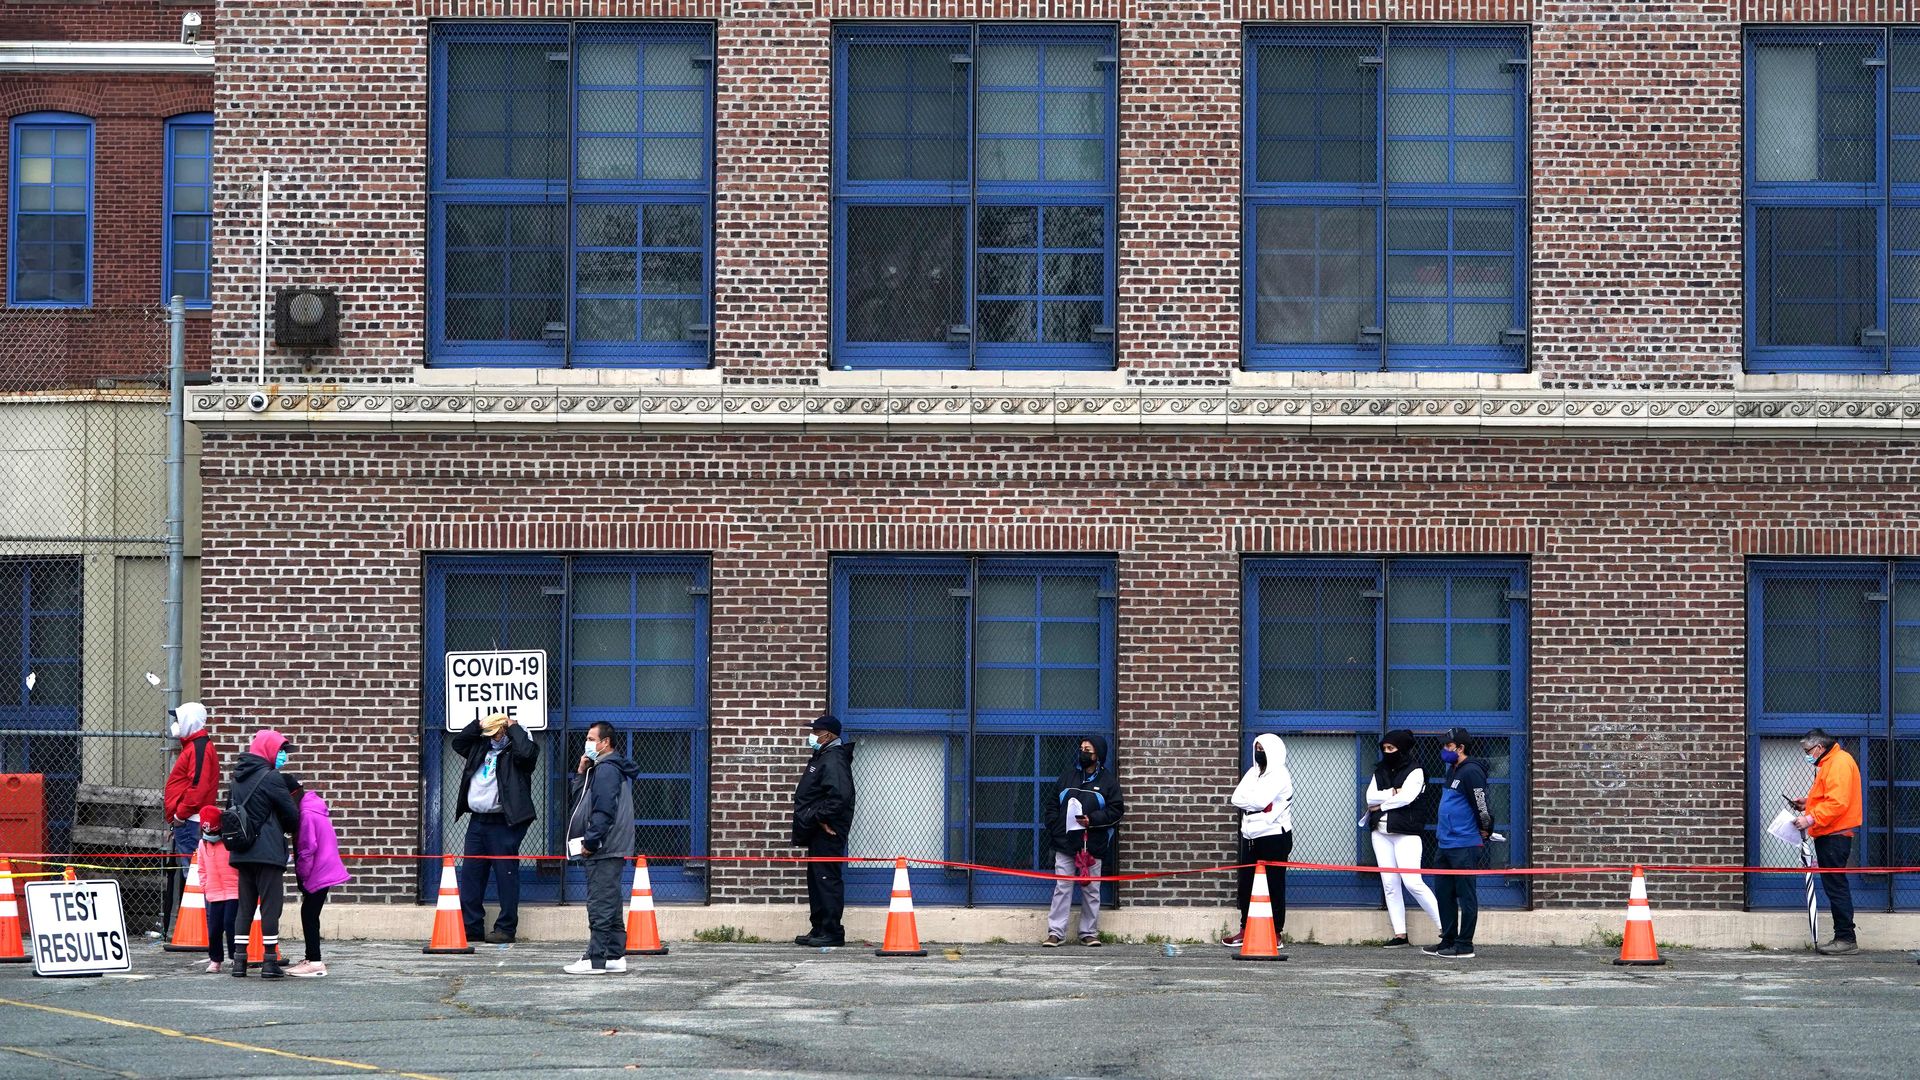 Photo of people lining up outside a building to get tested for COVID-19